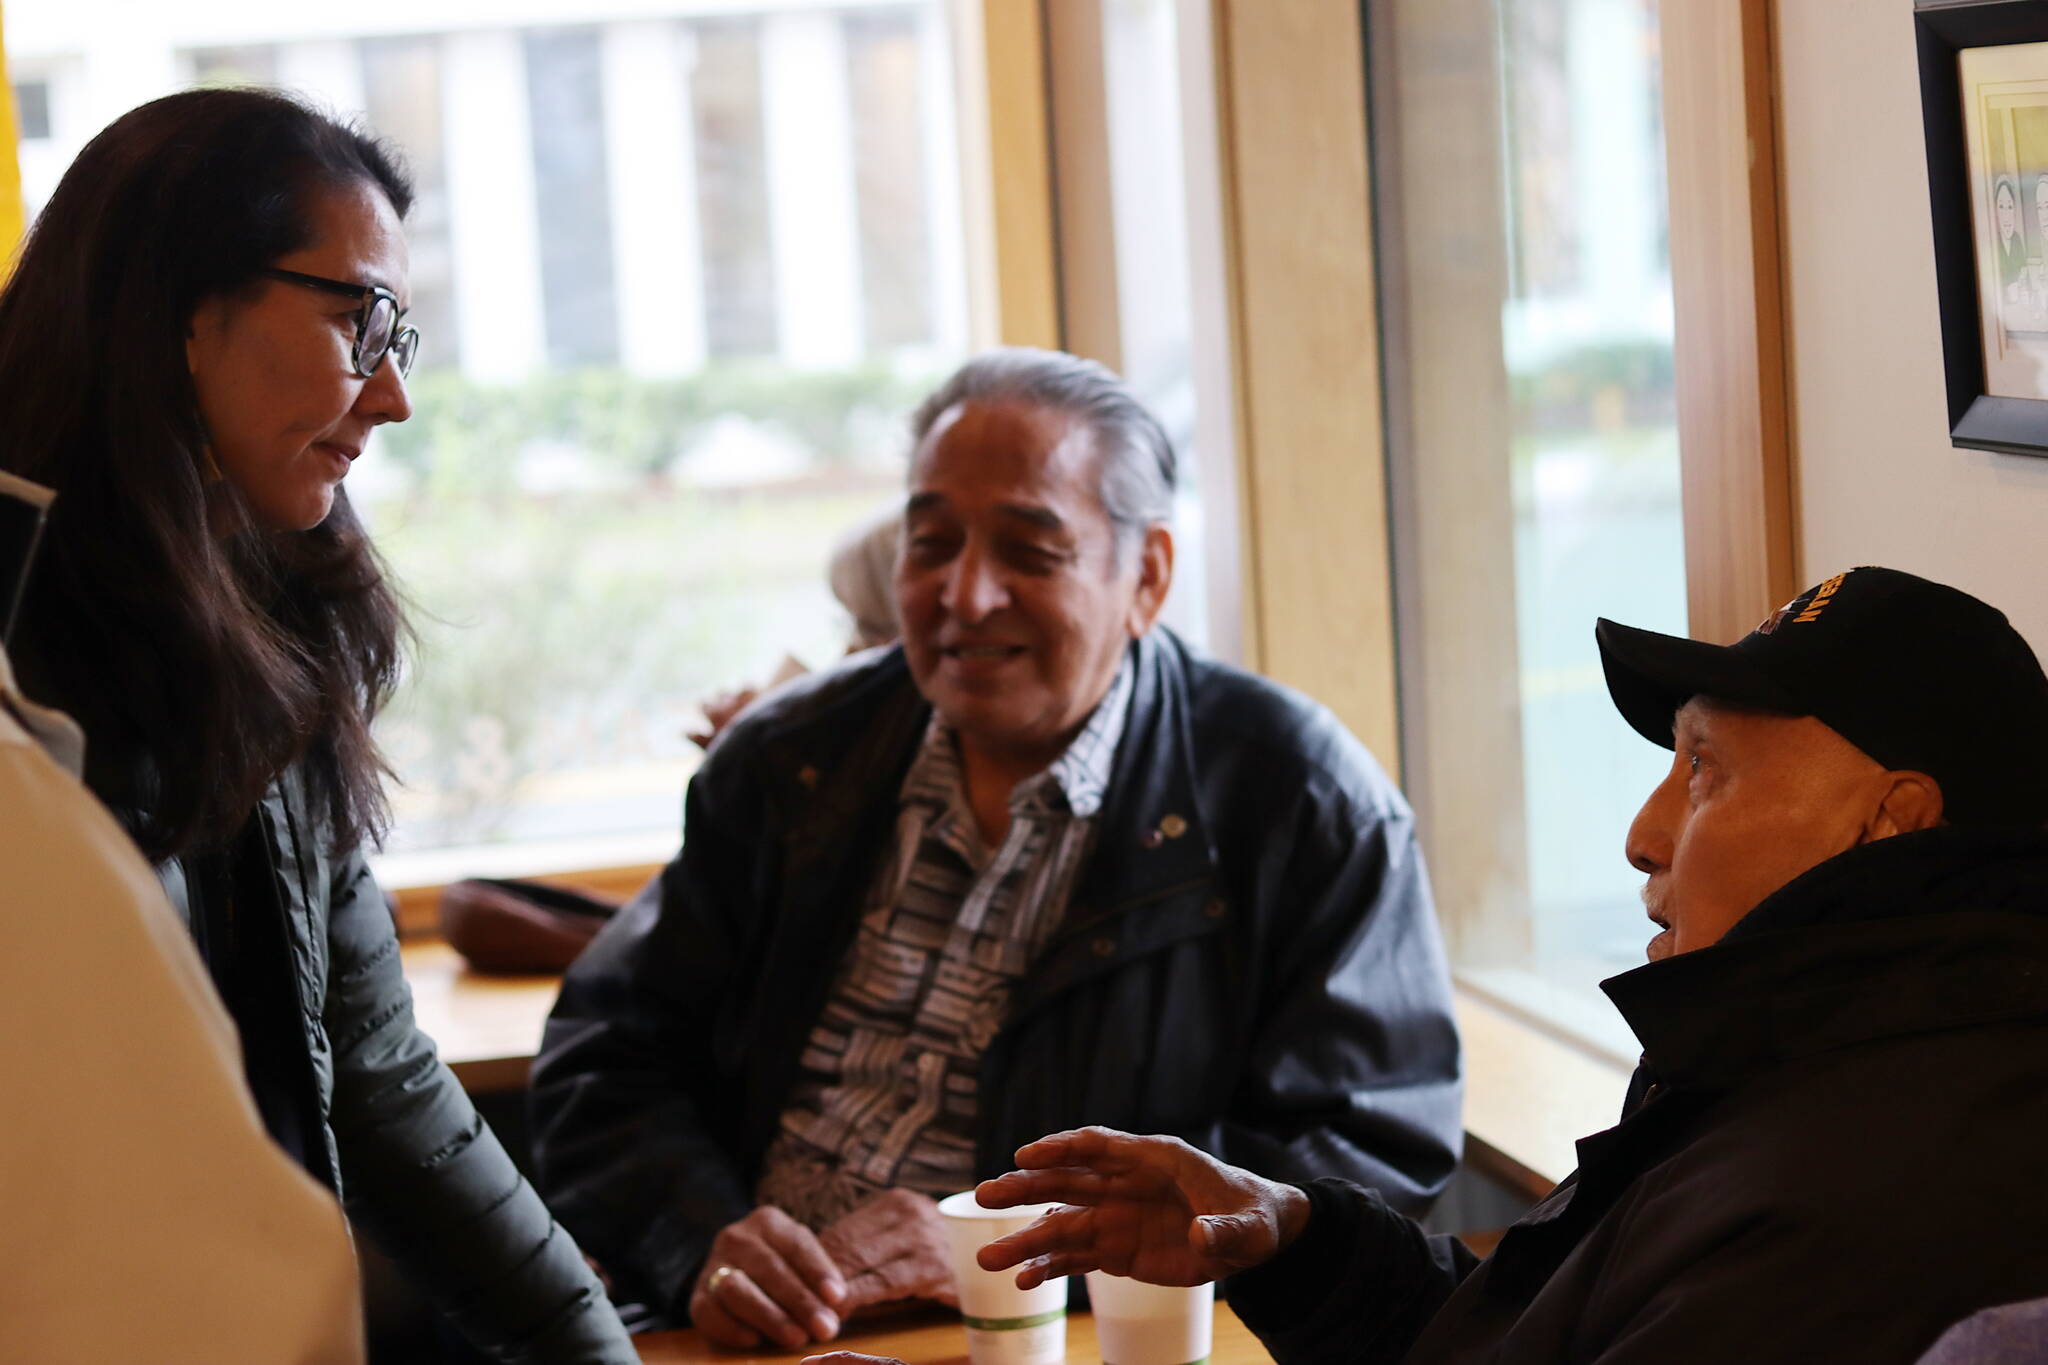 Raymond Wilson, 89, right, tells U.S. Rep. Mary Peltola during a meet-and-greet Tuesday at Coppa he plans to perform a ceremony invoking the spirit of a Chilkat headdress and robe on display at the Alaska State Museum, and for her “to imagine you have the Chilkat blanket around you when they start throwing mud and it will protect you.” (Mark Sabbatini / Juneau Empire)